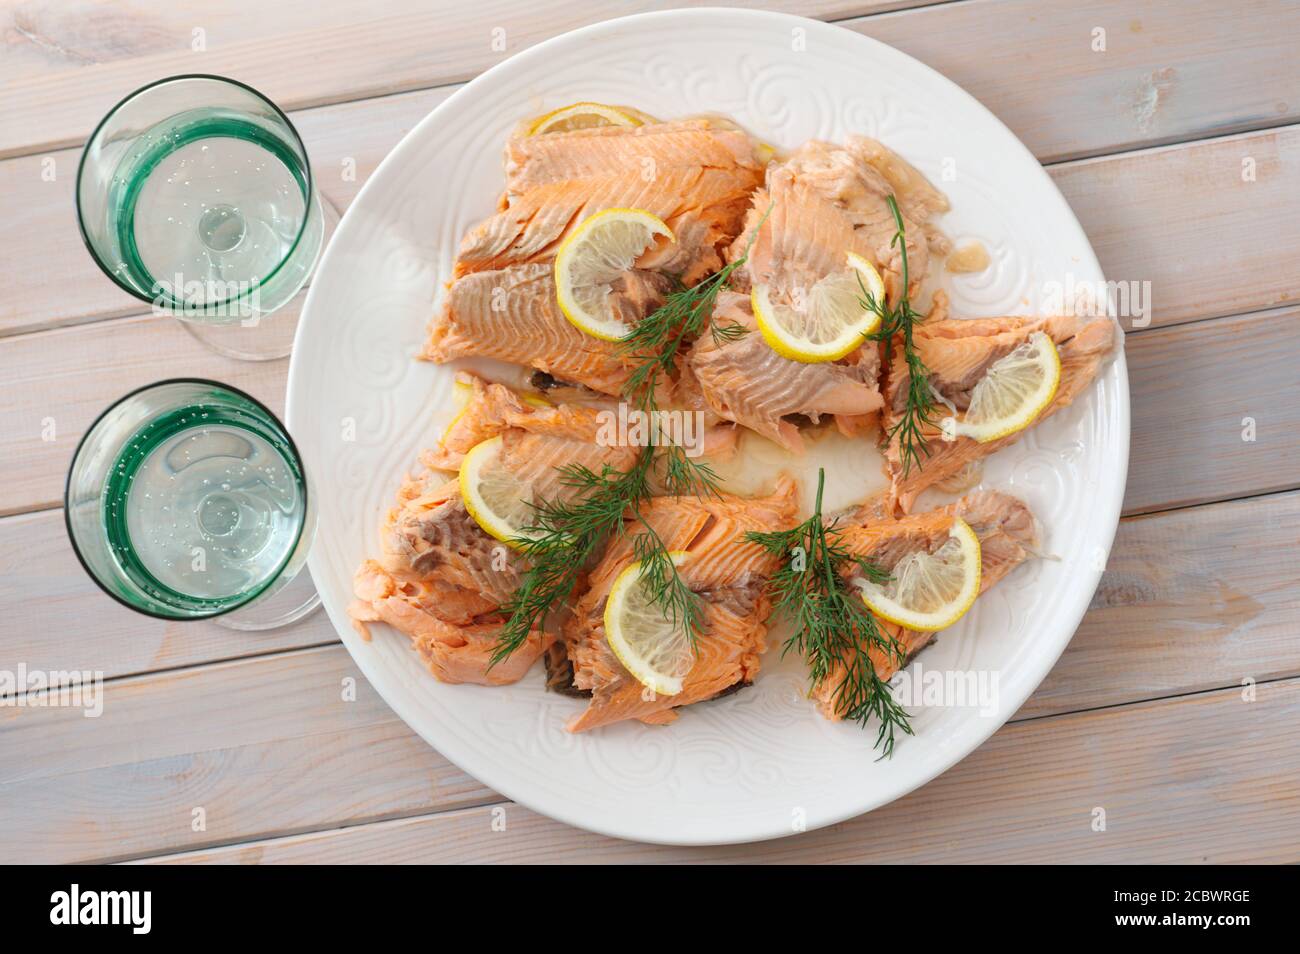 Baked trout fish served with slices of lemon and dill. Top view Stock Photo